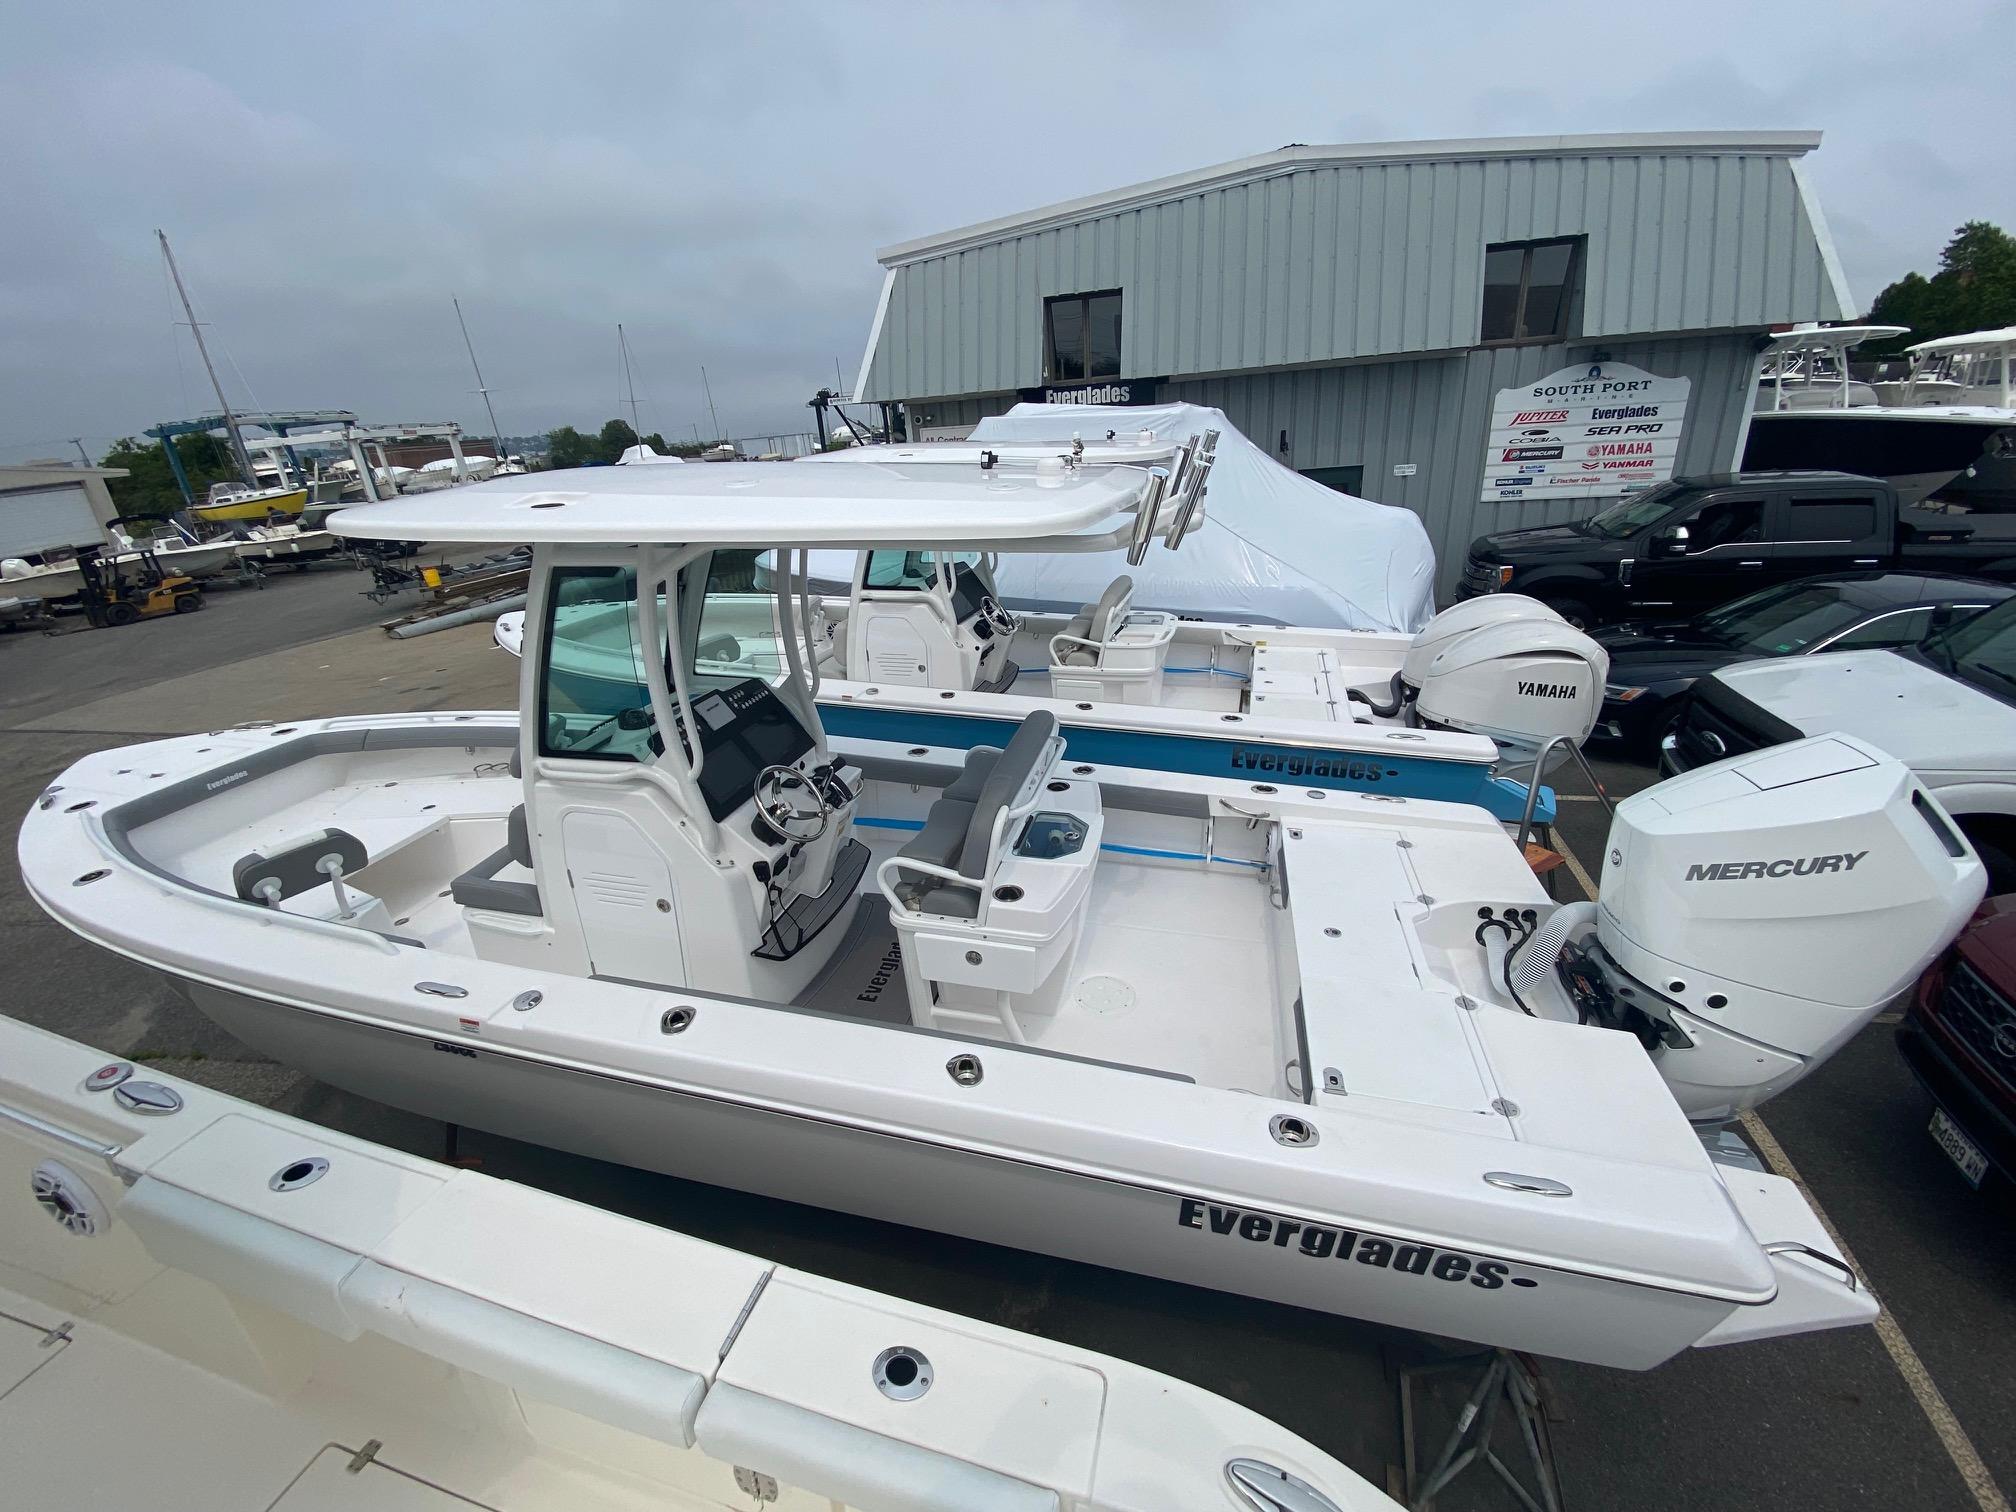 Everglades boats for sale